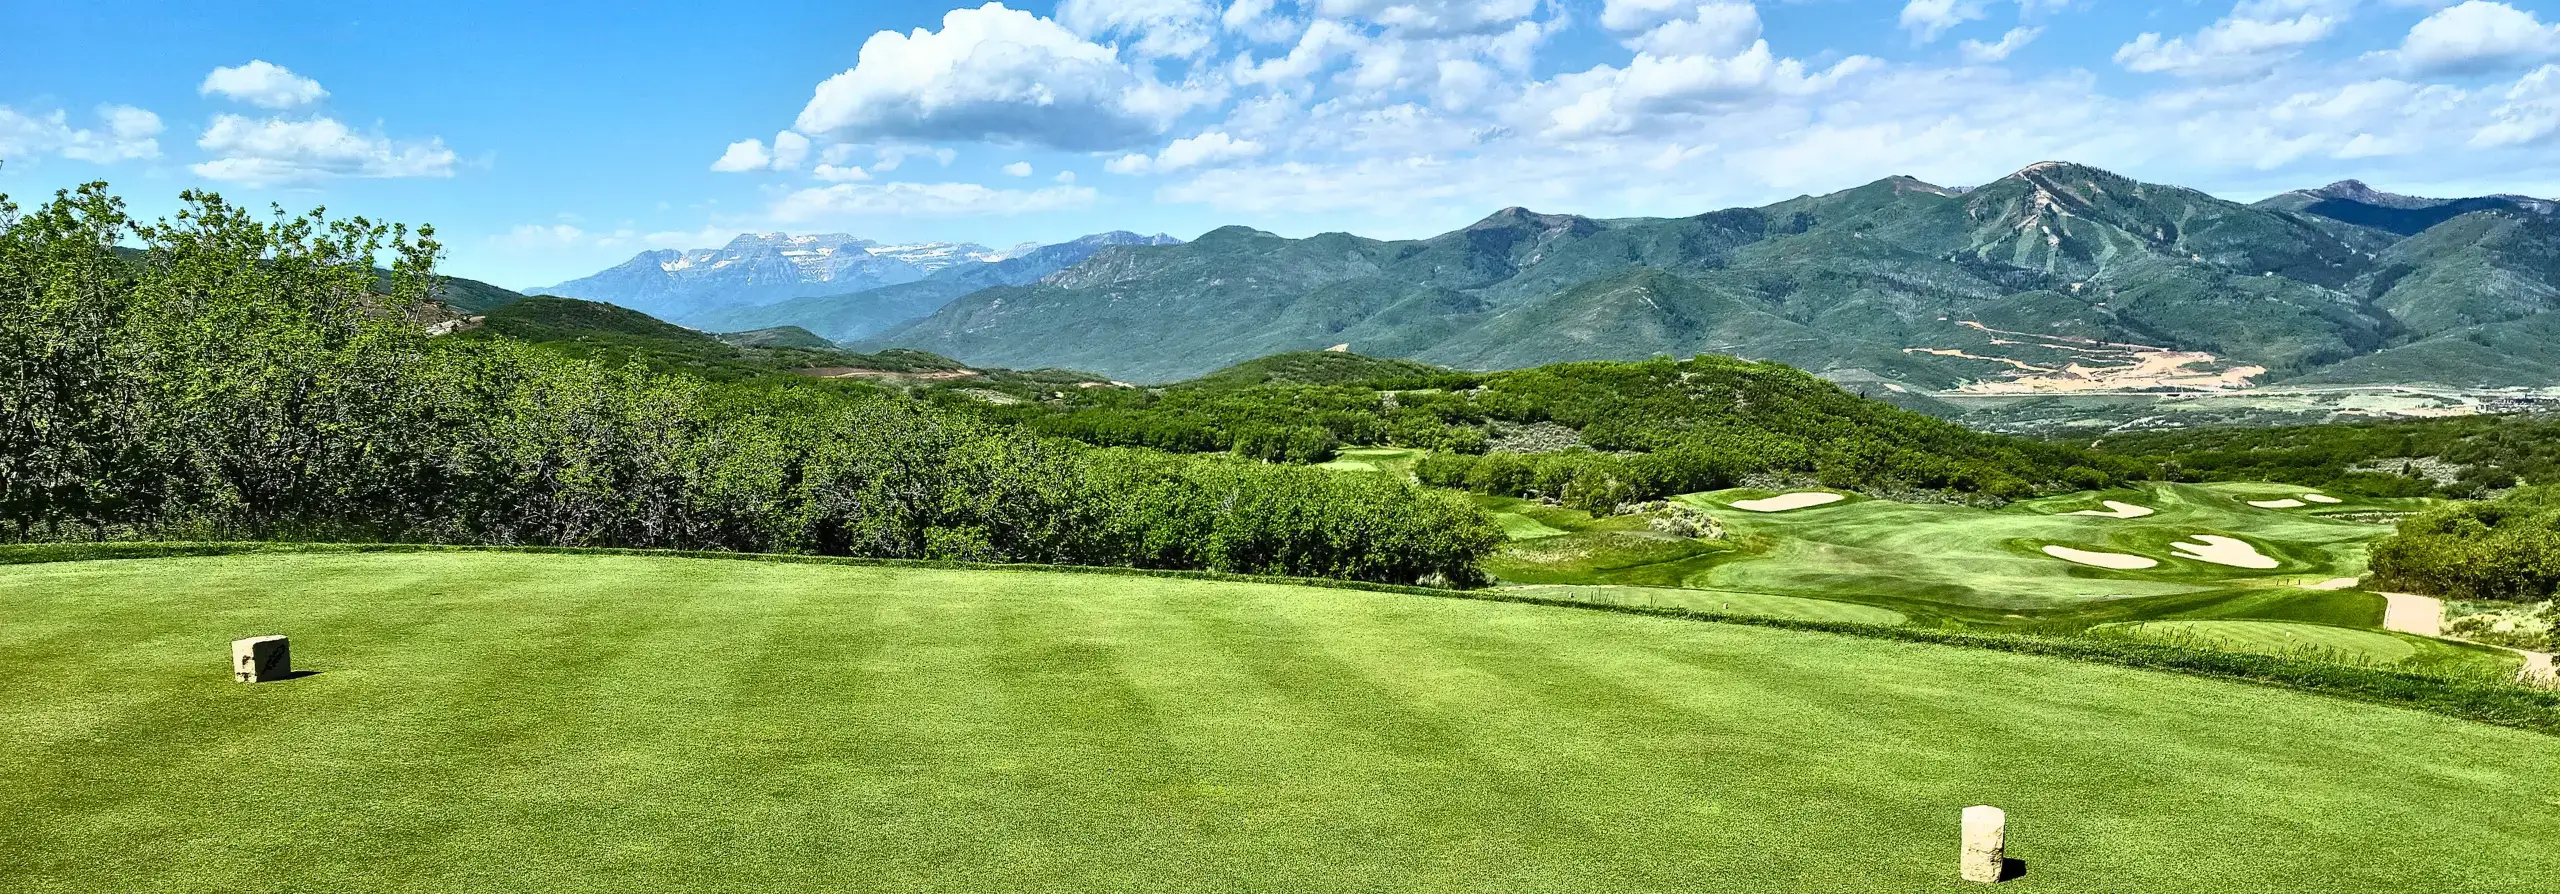 Park City Golf Homes for Sale including Glenwild, Promontory, Tuhaye, Victory Ranch, Red Ledges and Wohali